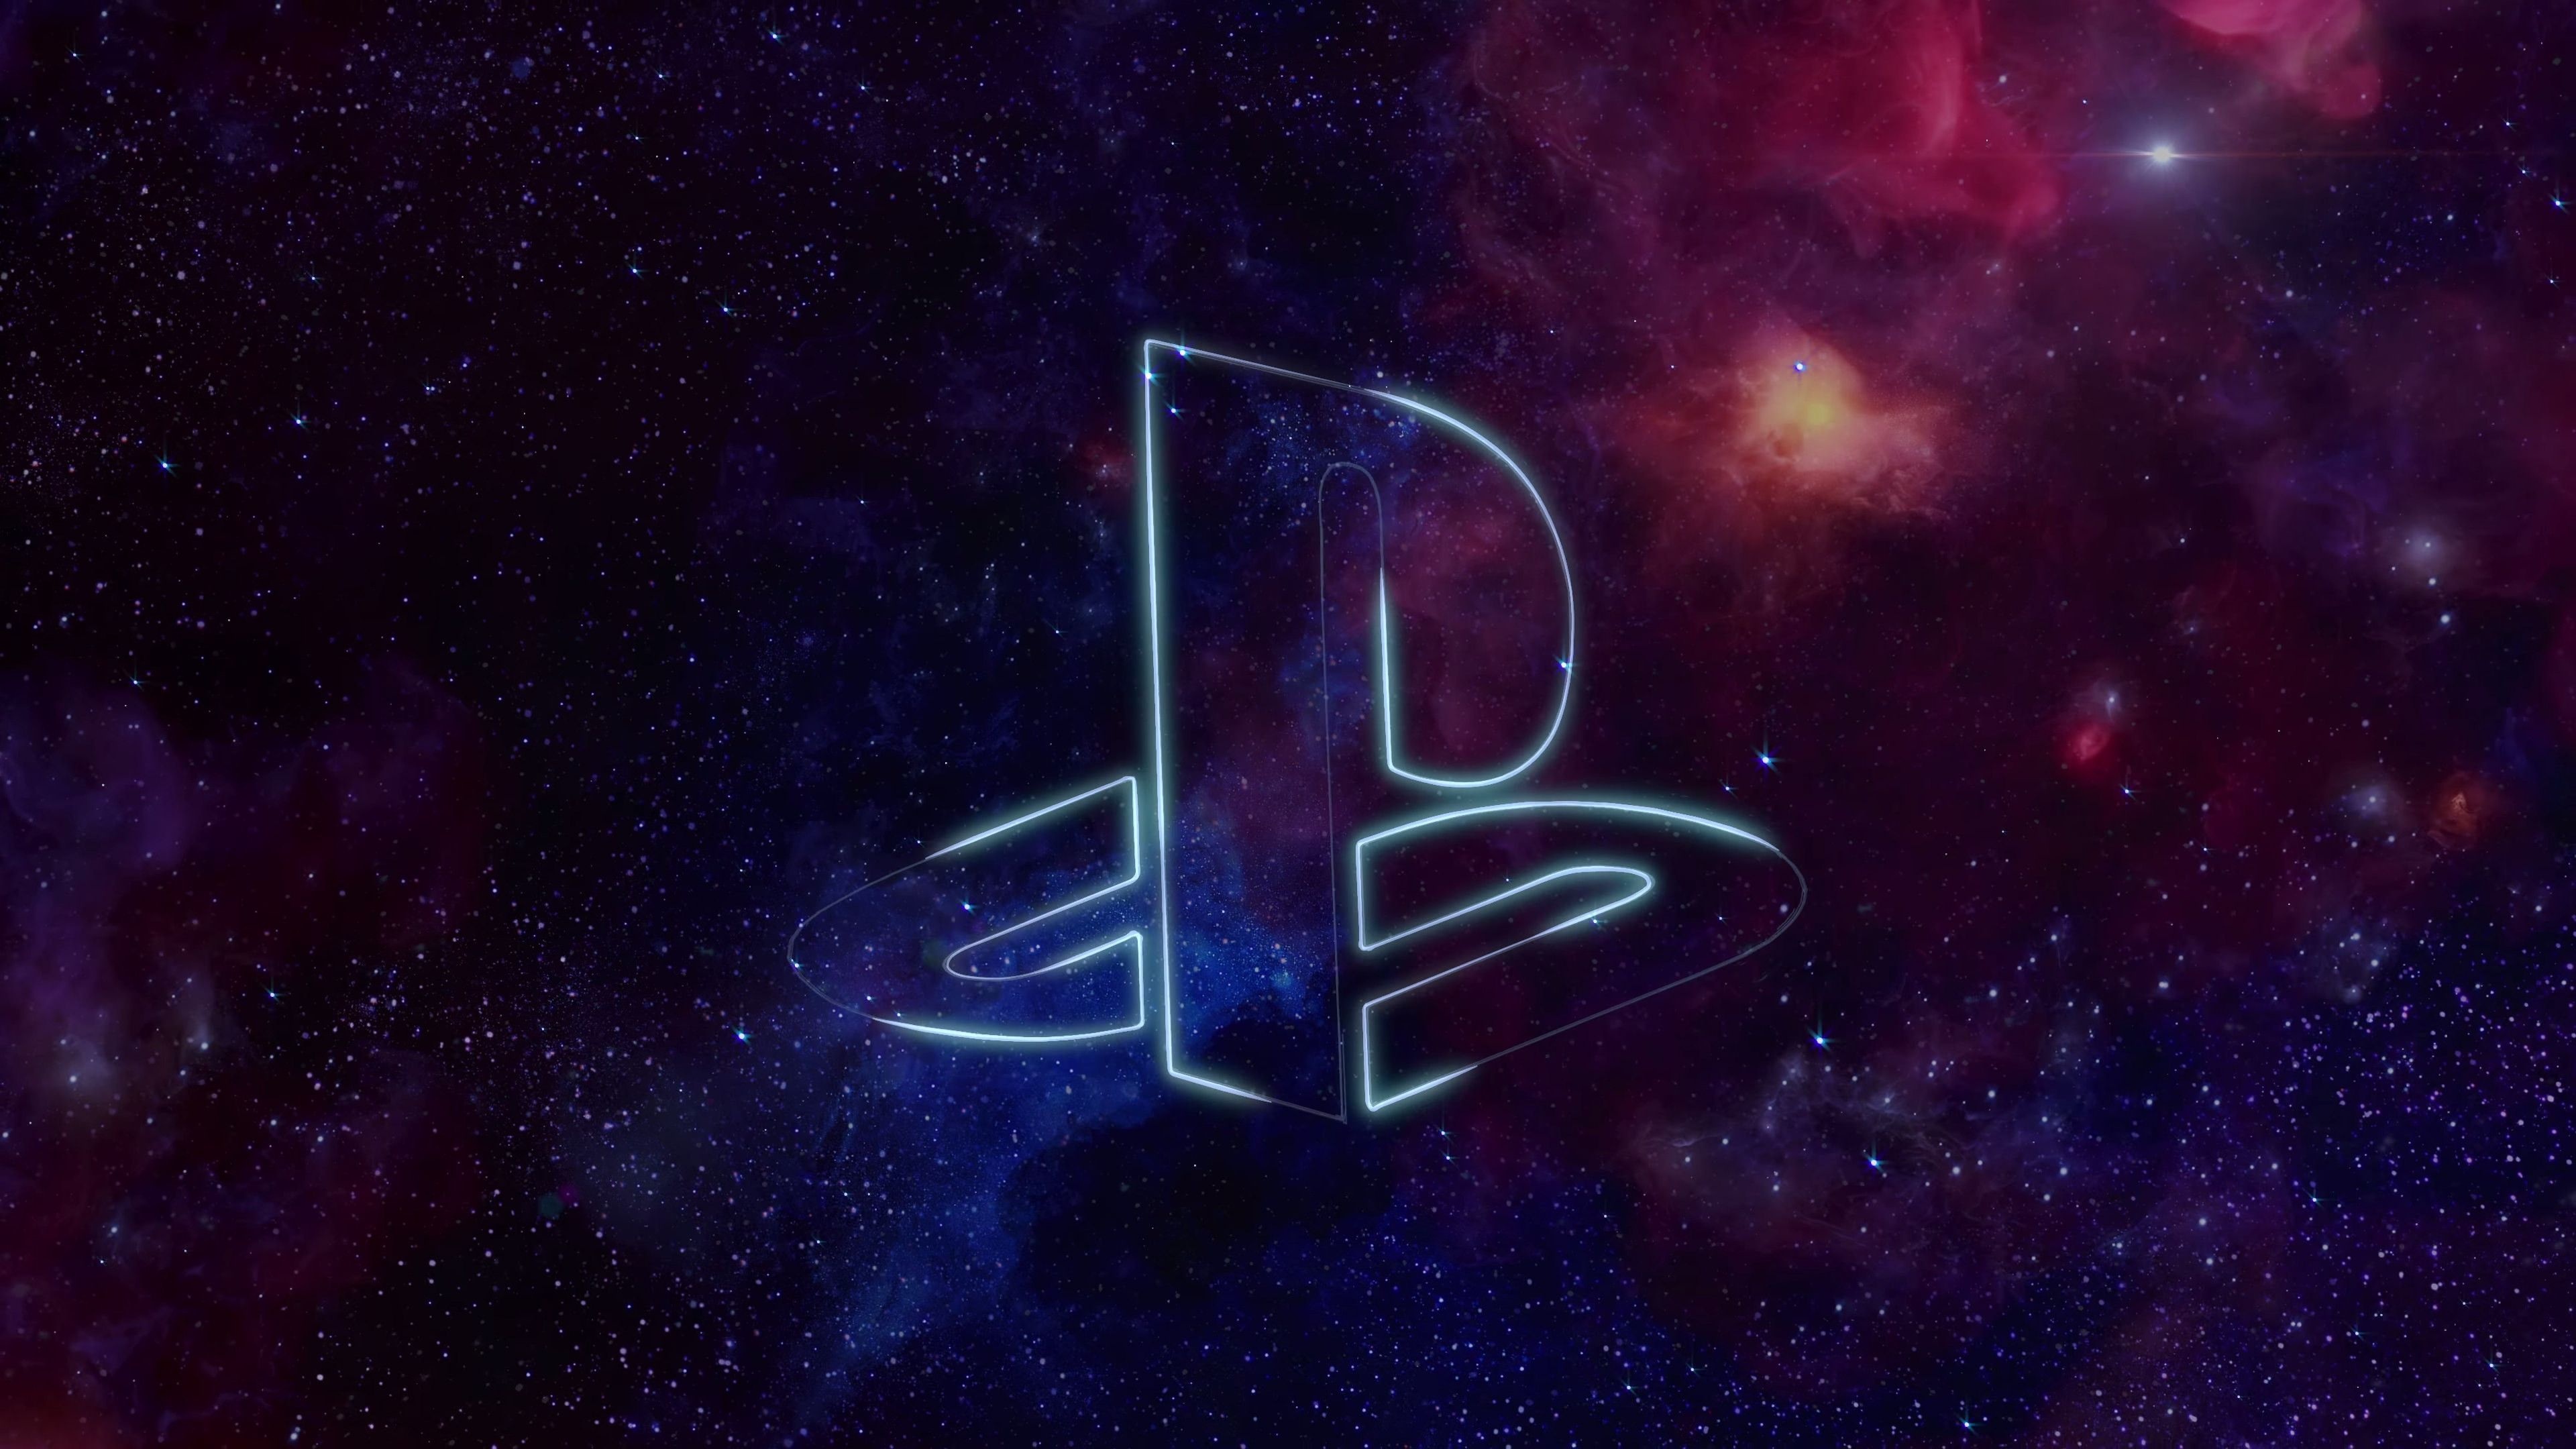 The PlayStation: Once the dominant video game system, PS, Abstract. 3840x2160 4K Background.